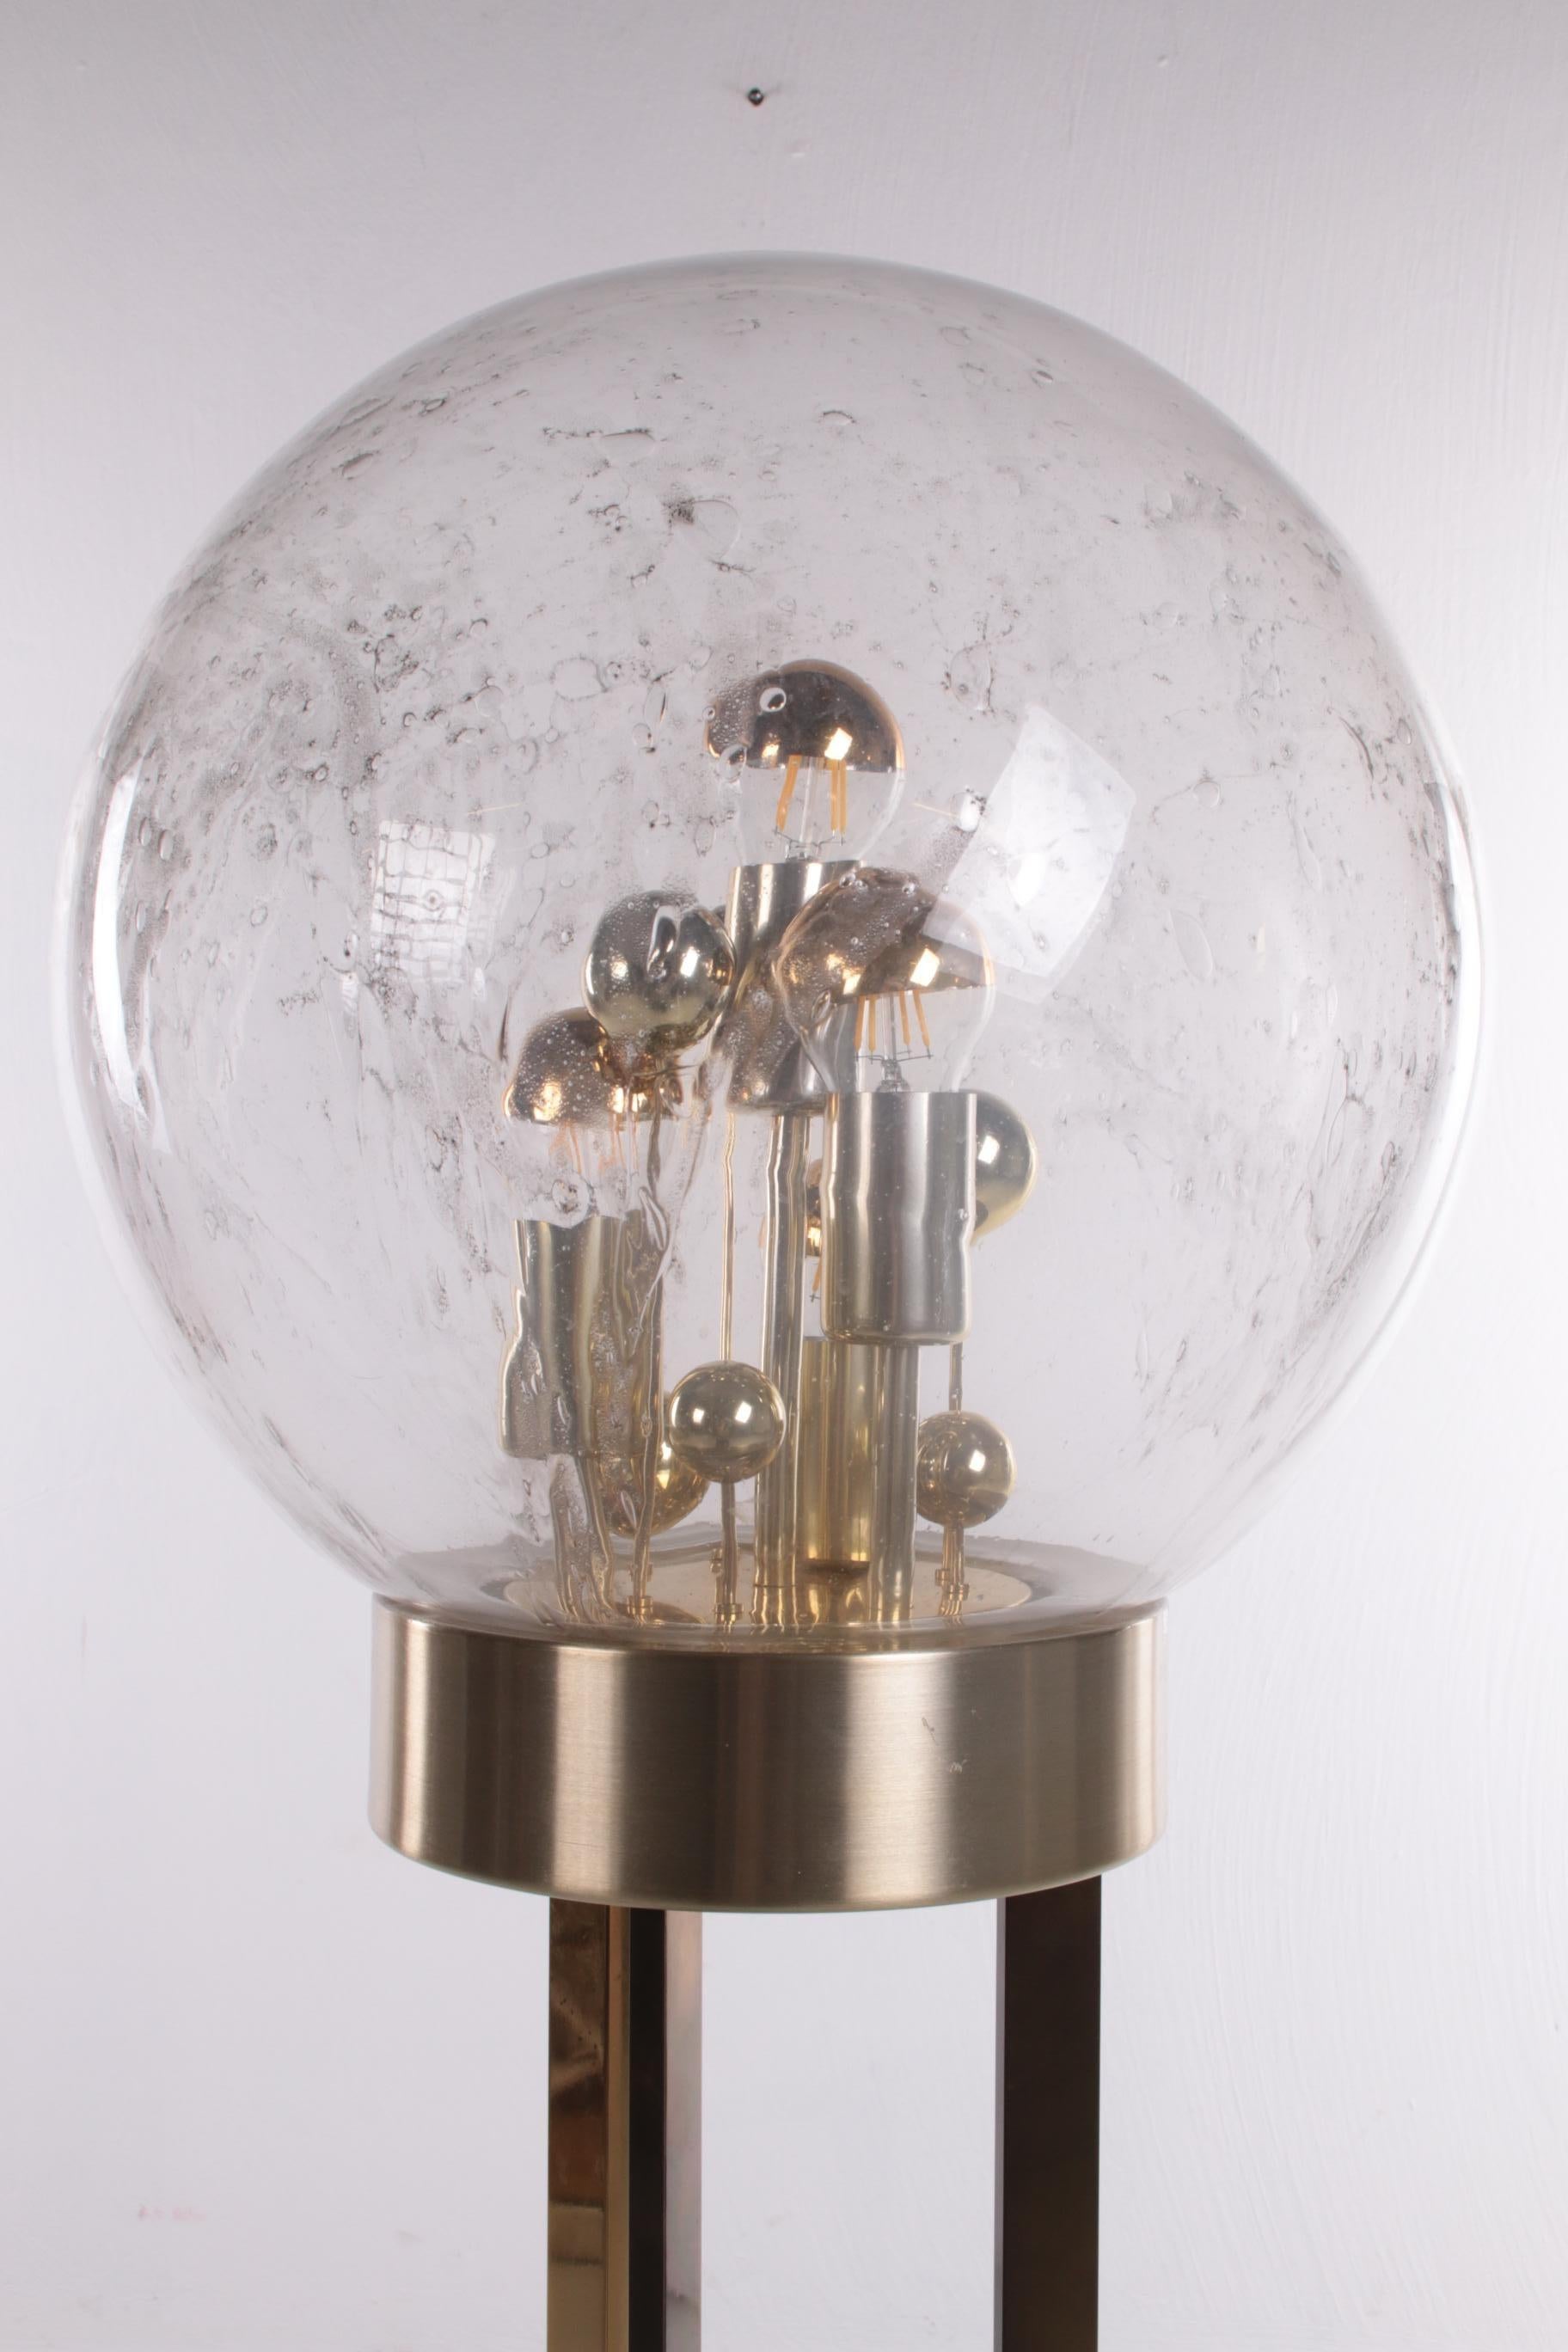 Sputnik floor lamp by Doria Leuchten, Germany, 1970s.


This beautiful Doria floor lamp is originally from 1970.

A glass sphere with air bubbles as the shade of the lamp.

The gold accents give this lamp a classy look.
1 Sustainable: